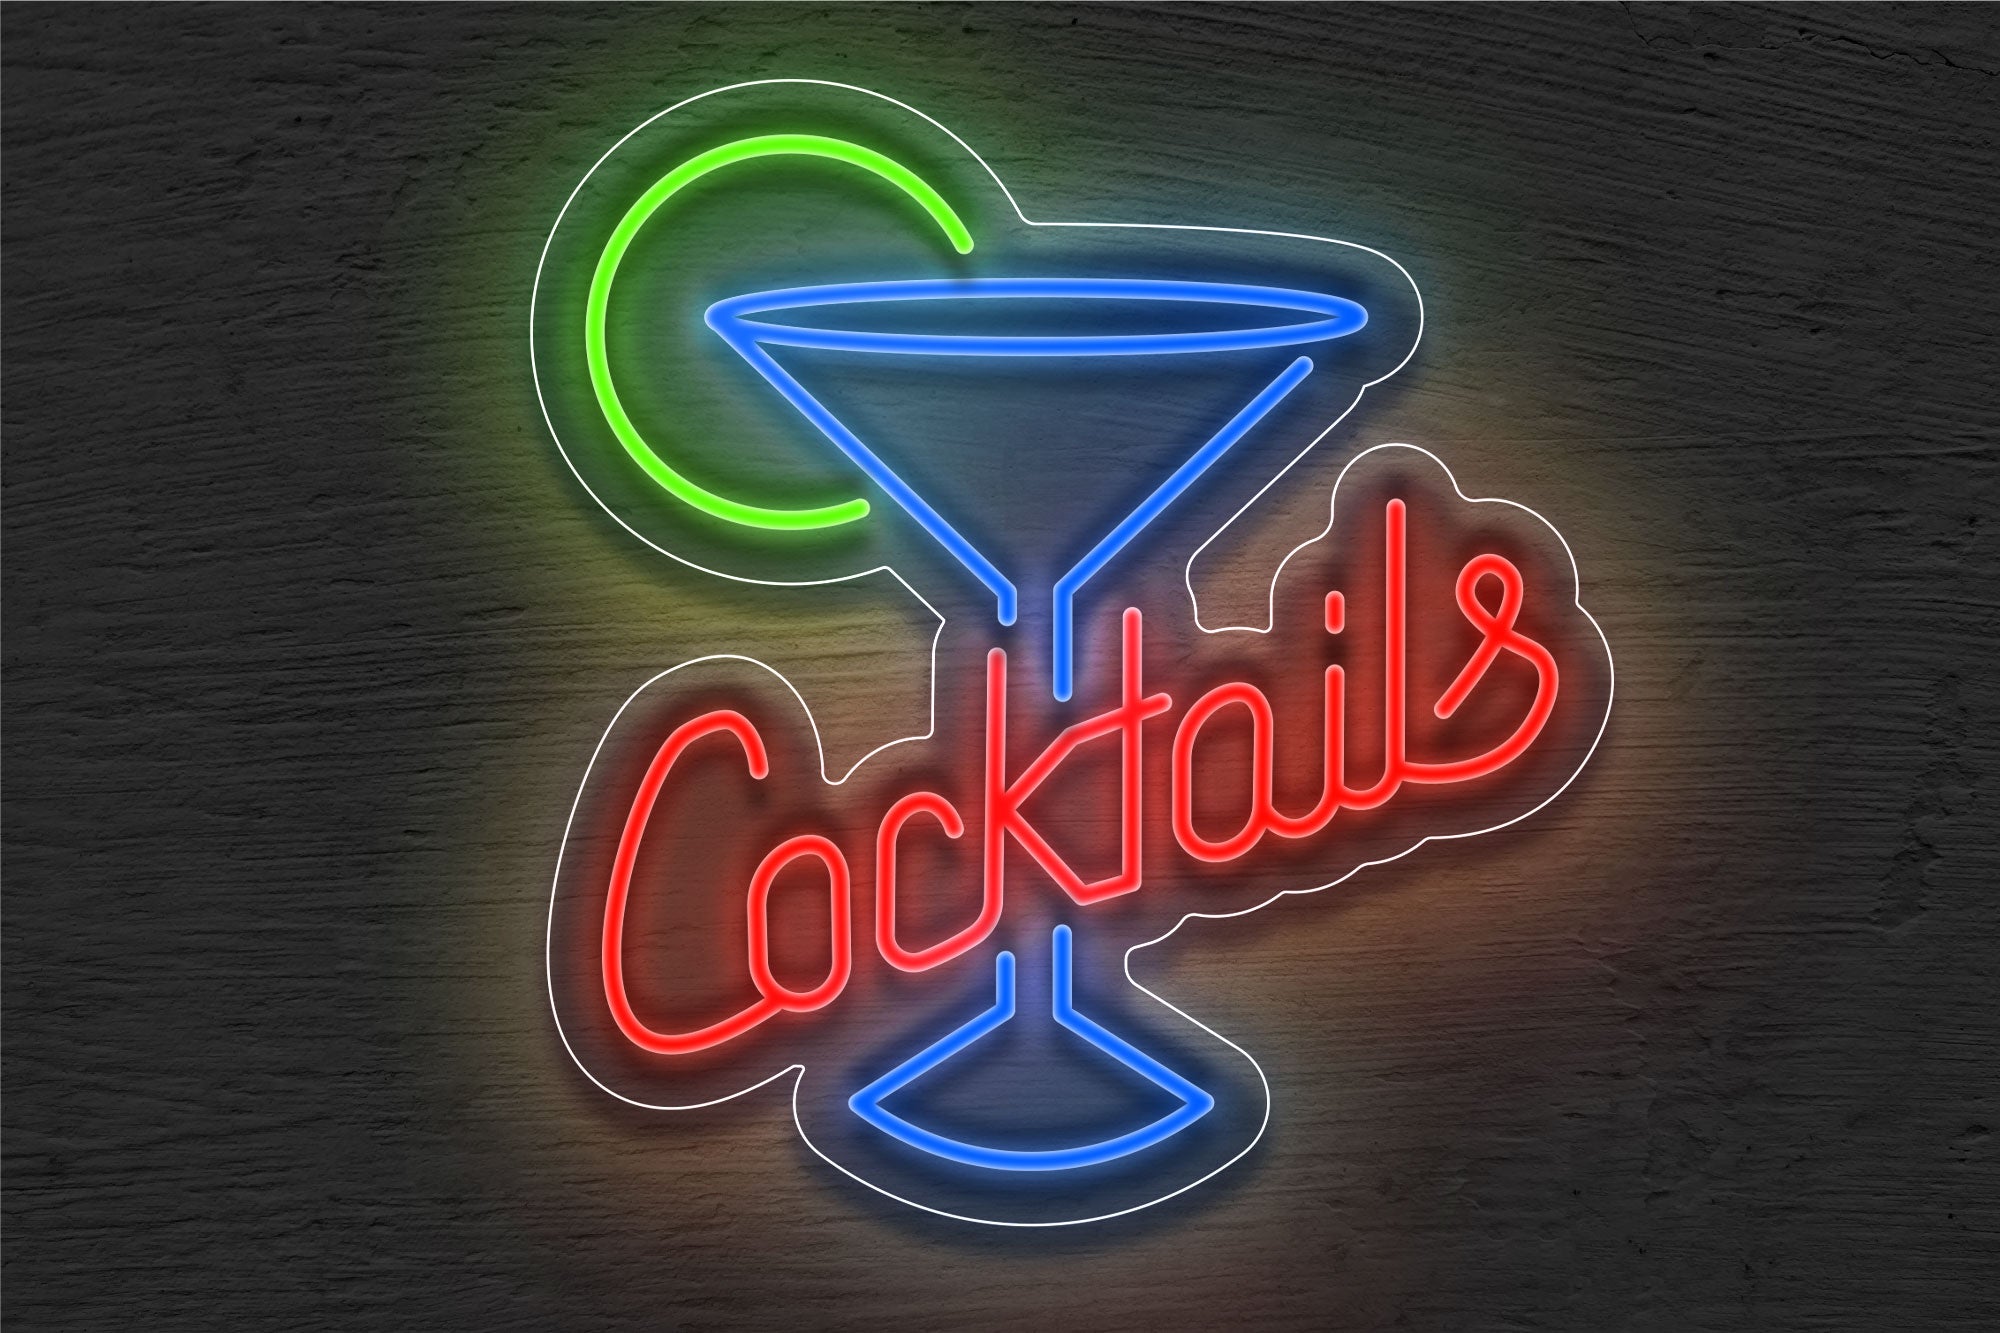 Cocktails with Martini Glass LED Neon Sign